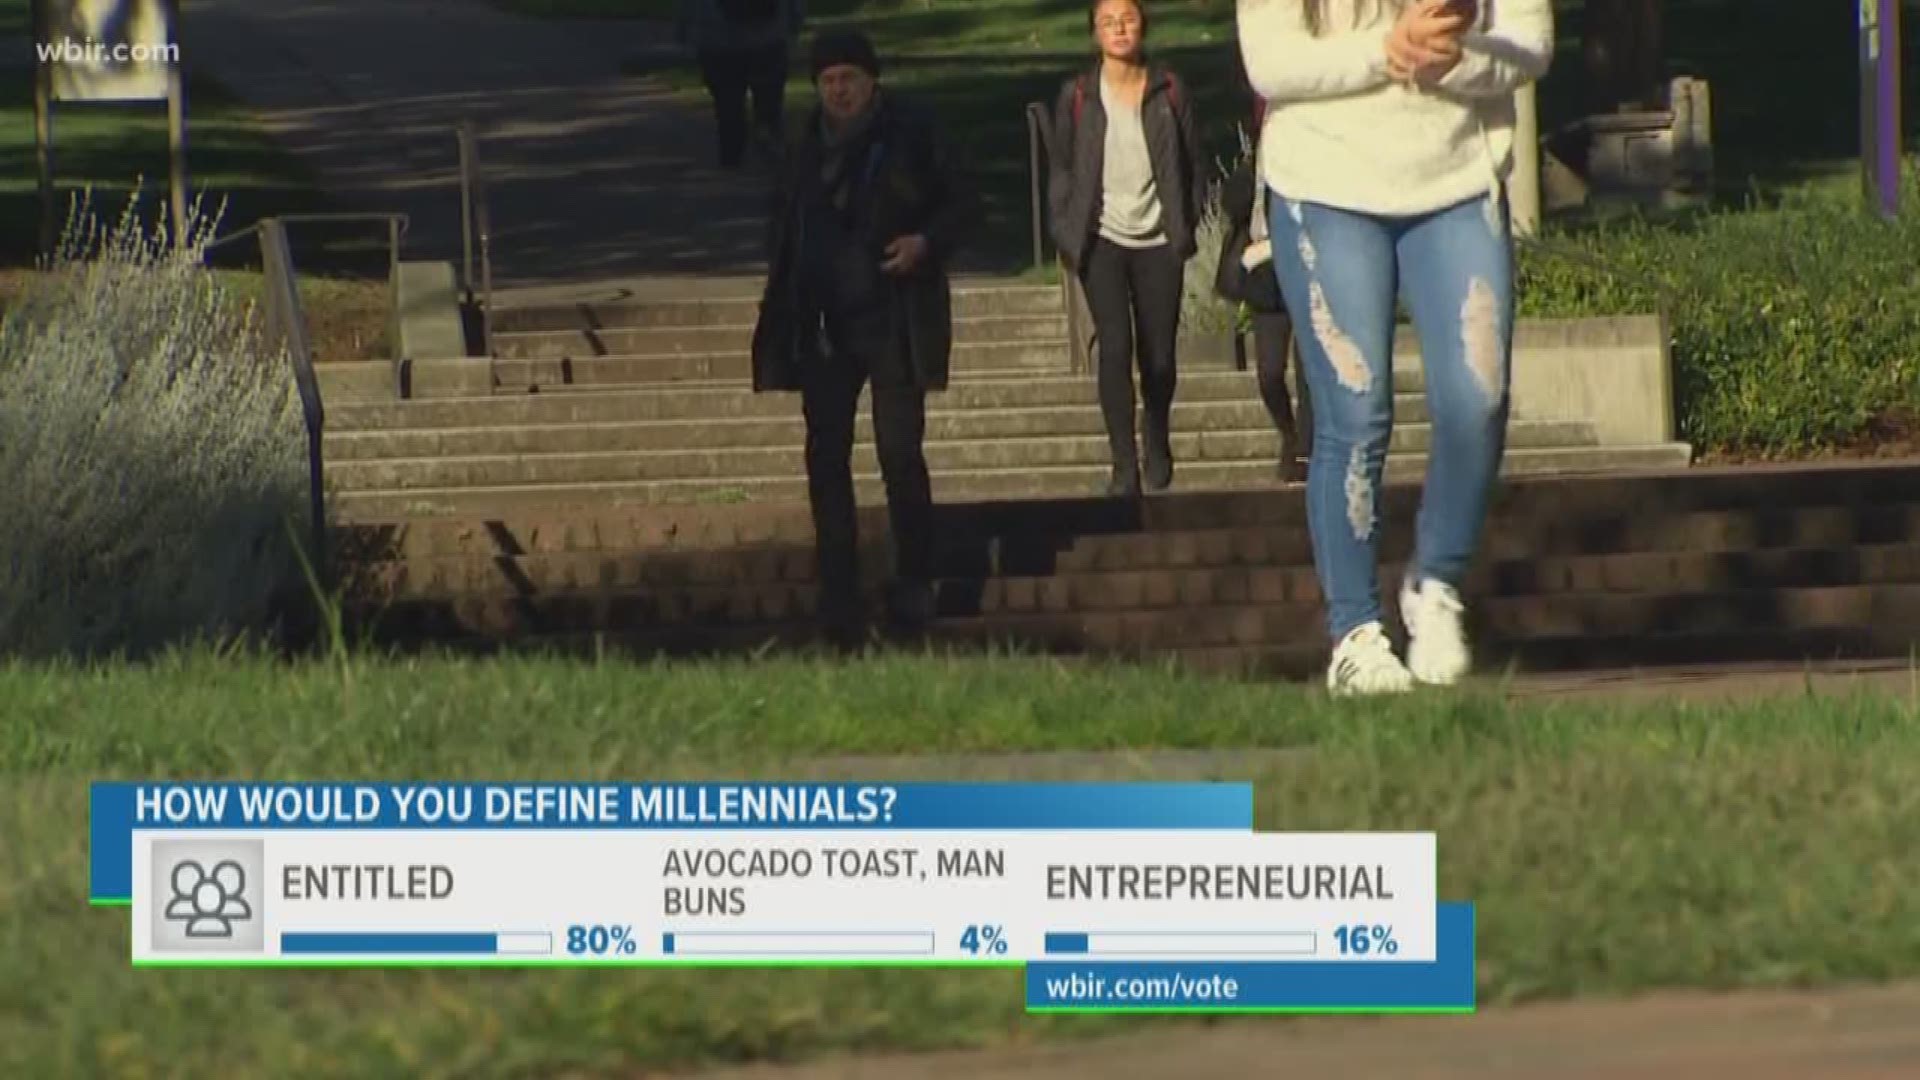 Millennials were born between 1981 and 1996. They are often accused of being entitled and having unrealistic expectations.